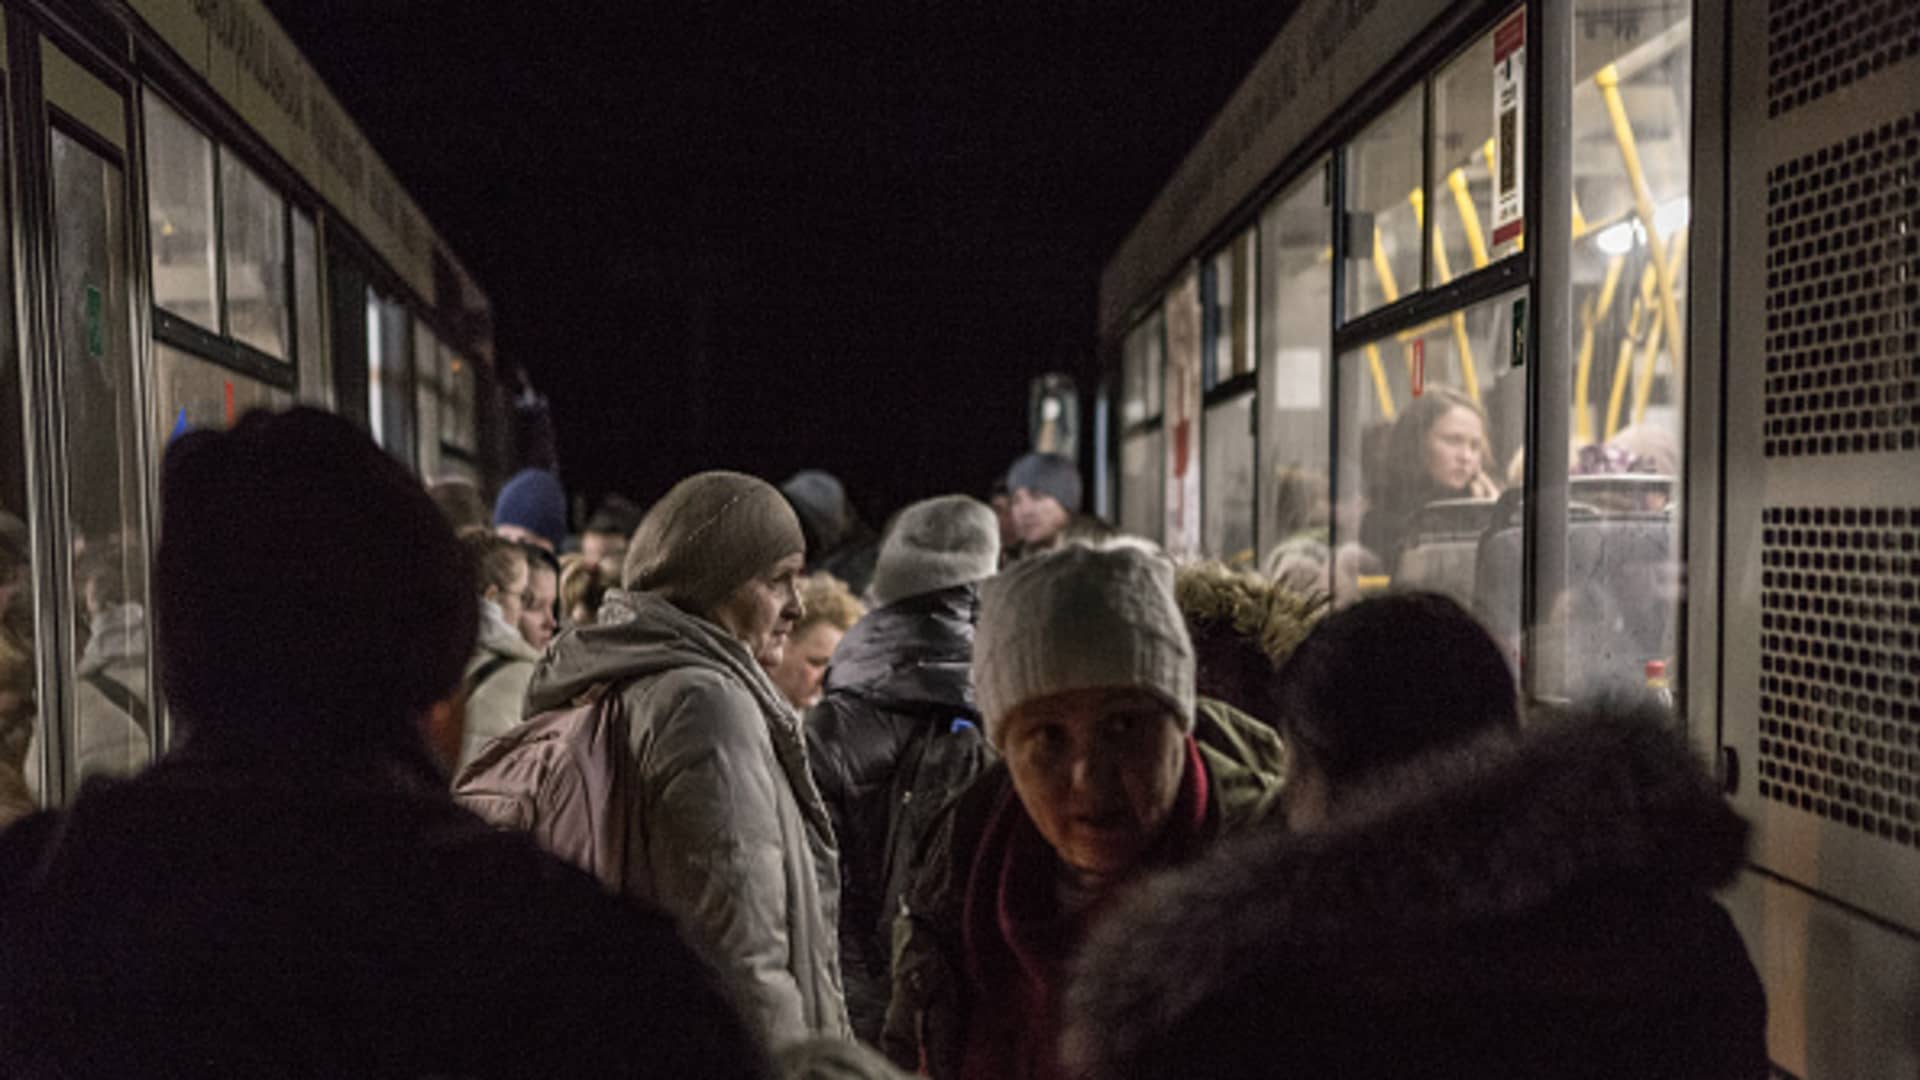 15 buses arrive from Mariupol, evacuating over 1,000 people due to ongoing Russian attacks in Zaporizzja, Ukraine on March 22, 2022.